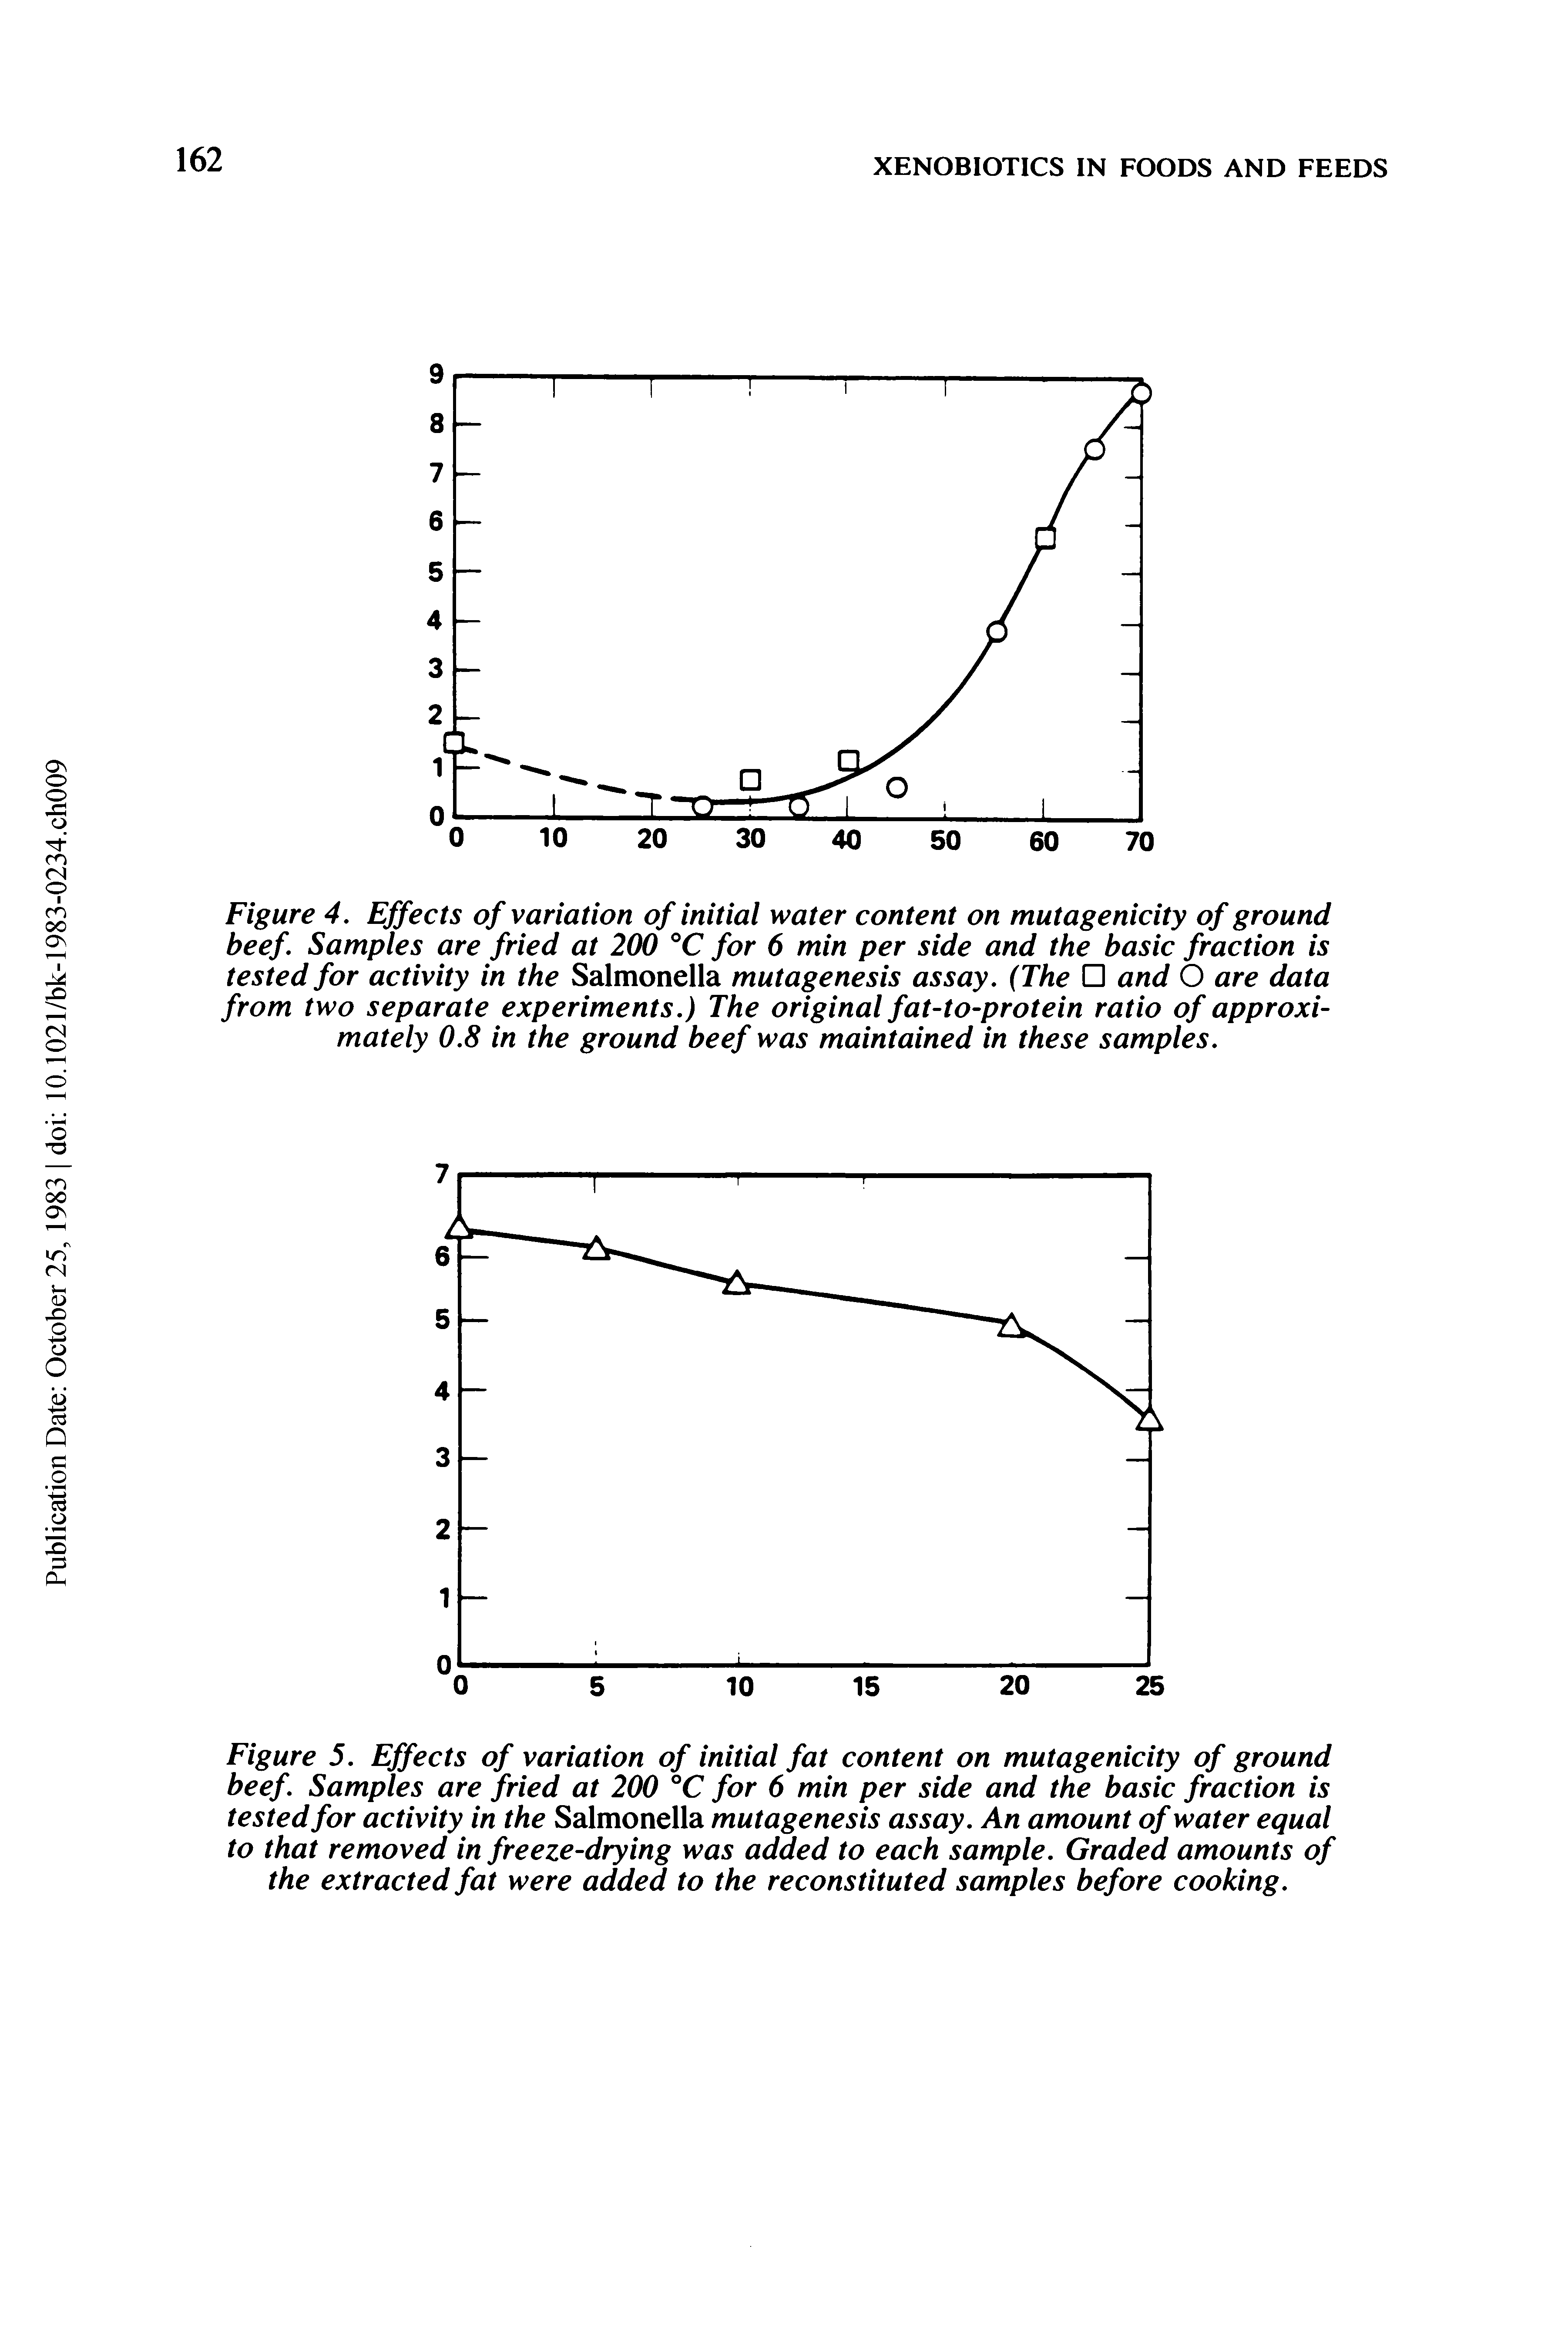 Figure 4. Effects of variation of initial water content on mutagenicity of ground beef Samples are fried at 200 °C for 6 min per side and the basic fraction is tested for activity in the Salmonella mutagenesis assay. (The and O are data from two separate experiments.) The original fat-to-protein ratio of approximately 0.8 in the ground beef was maintained in these samples.